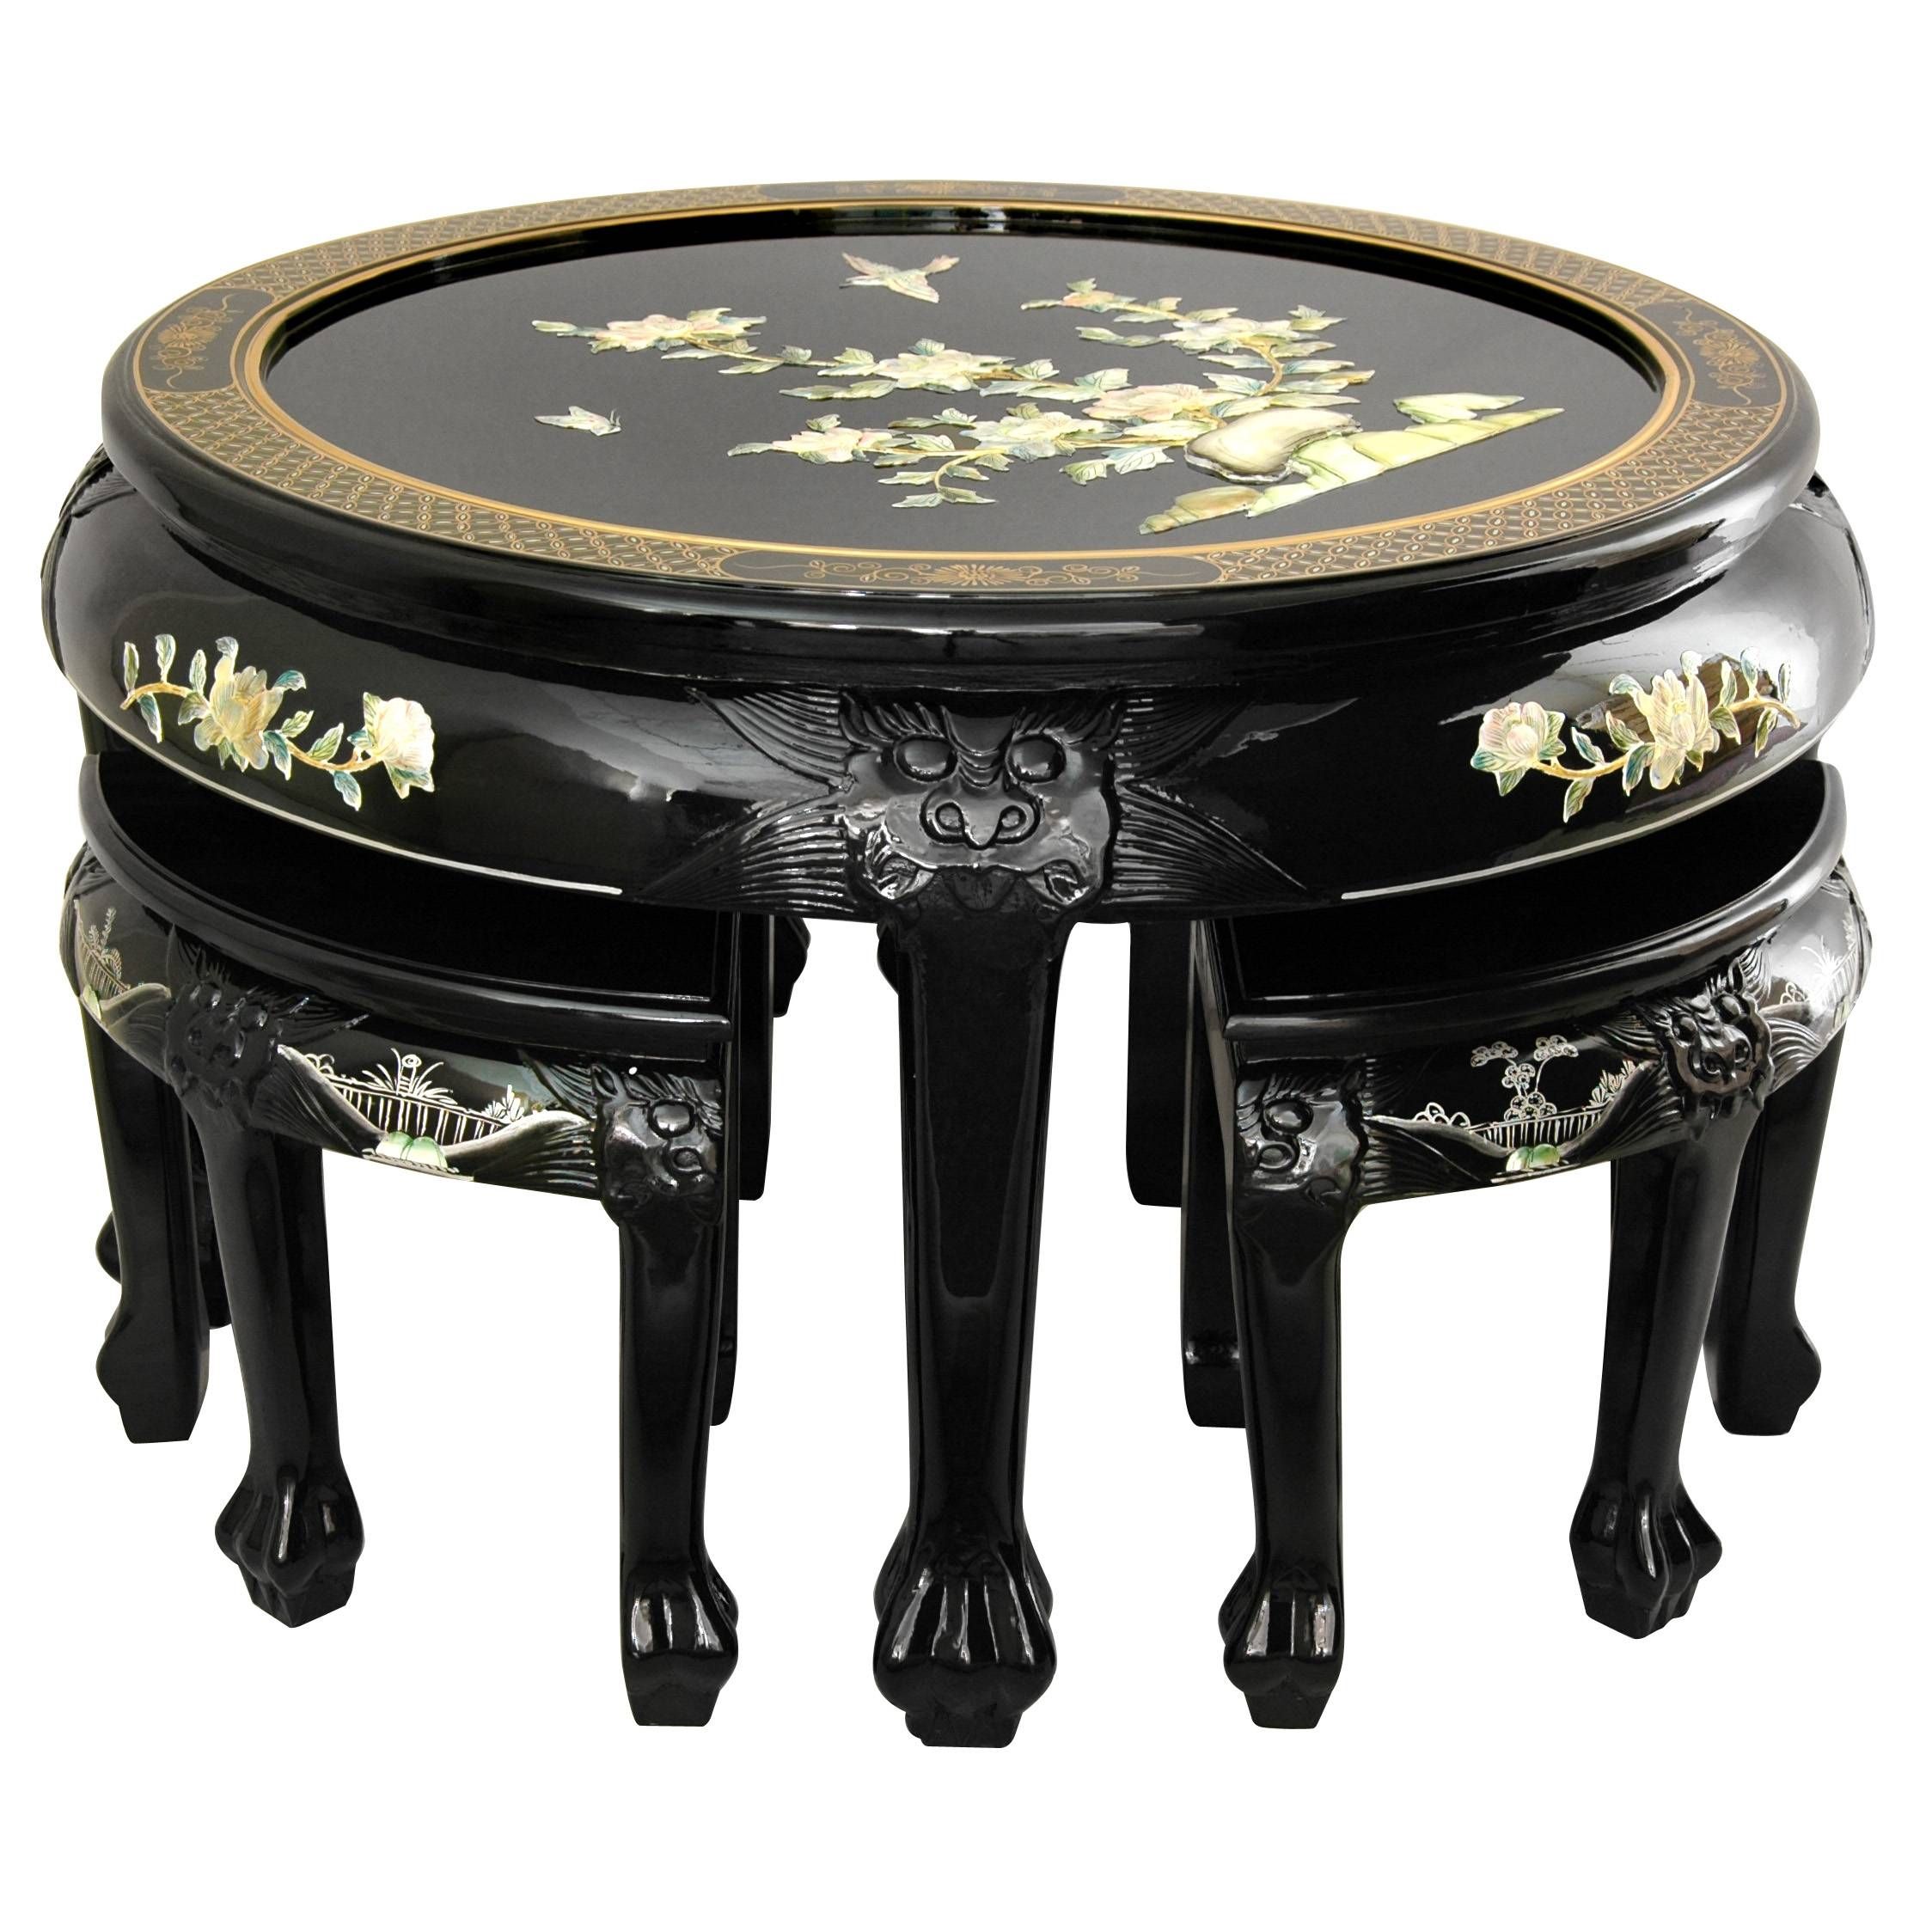 Buy Black Lacquer Mother Of Pearl Round Coffee Table W/ Four Within Mother Of Pearl Coffee Tables (View 12 of 30)